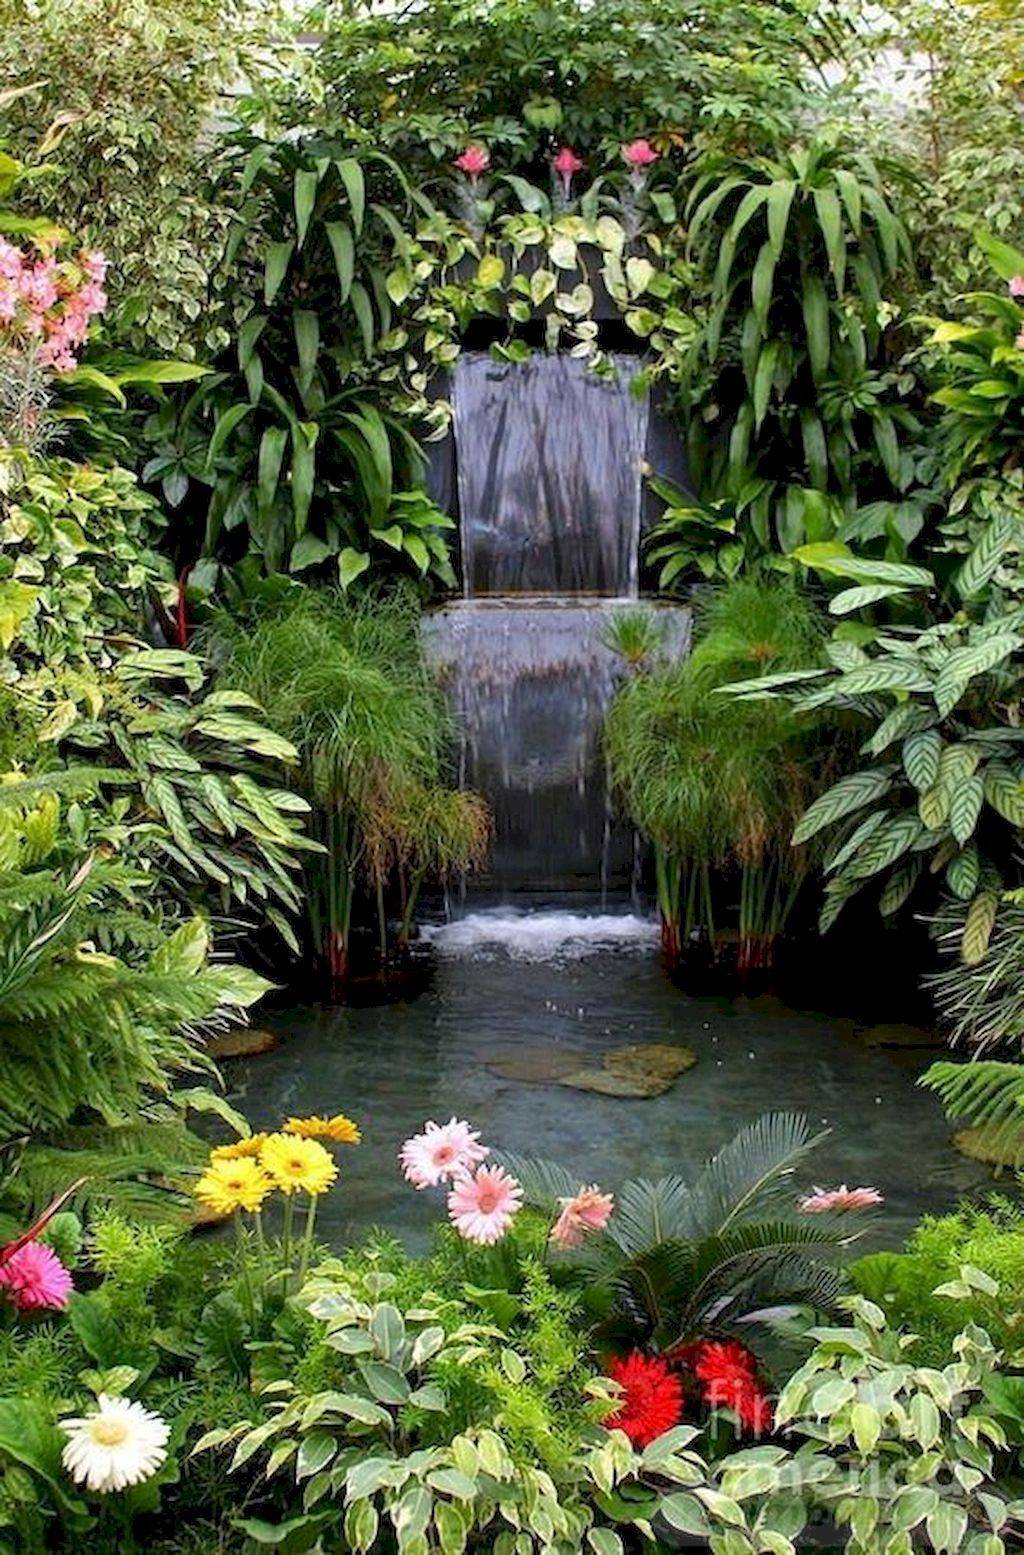 Fresh And Calming Tropical Garden Ideas Tropical Pool Landscaping